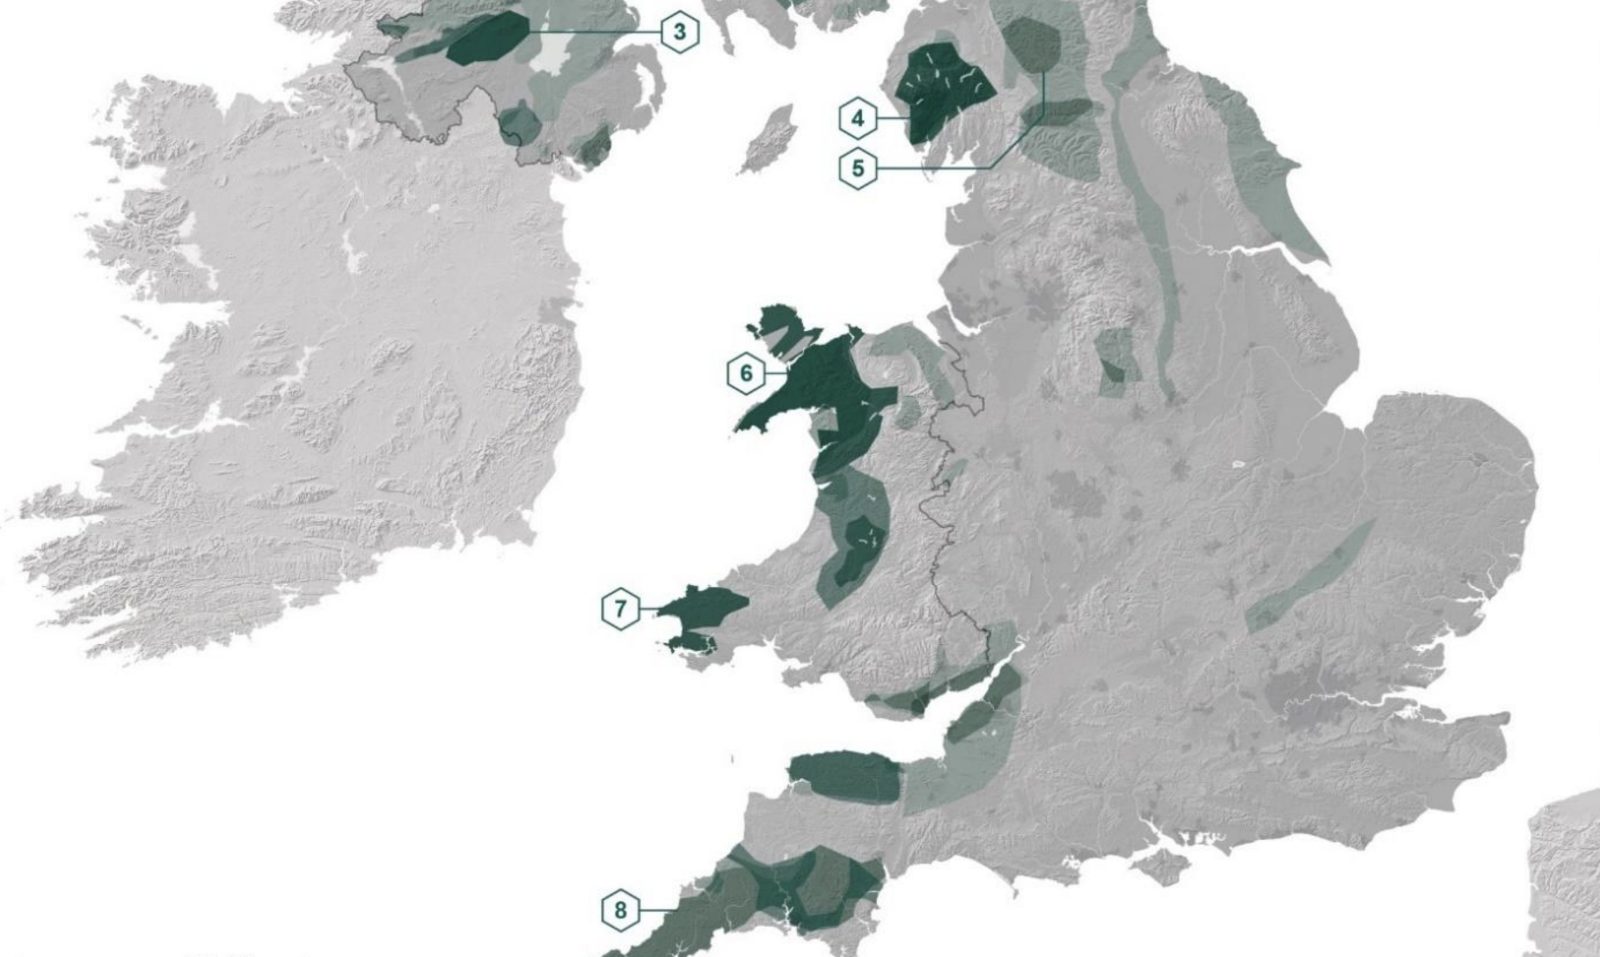 Areas of the UK considered potentially prospective for critical raw materials.